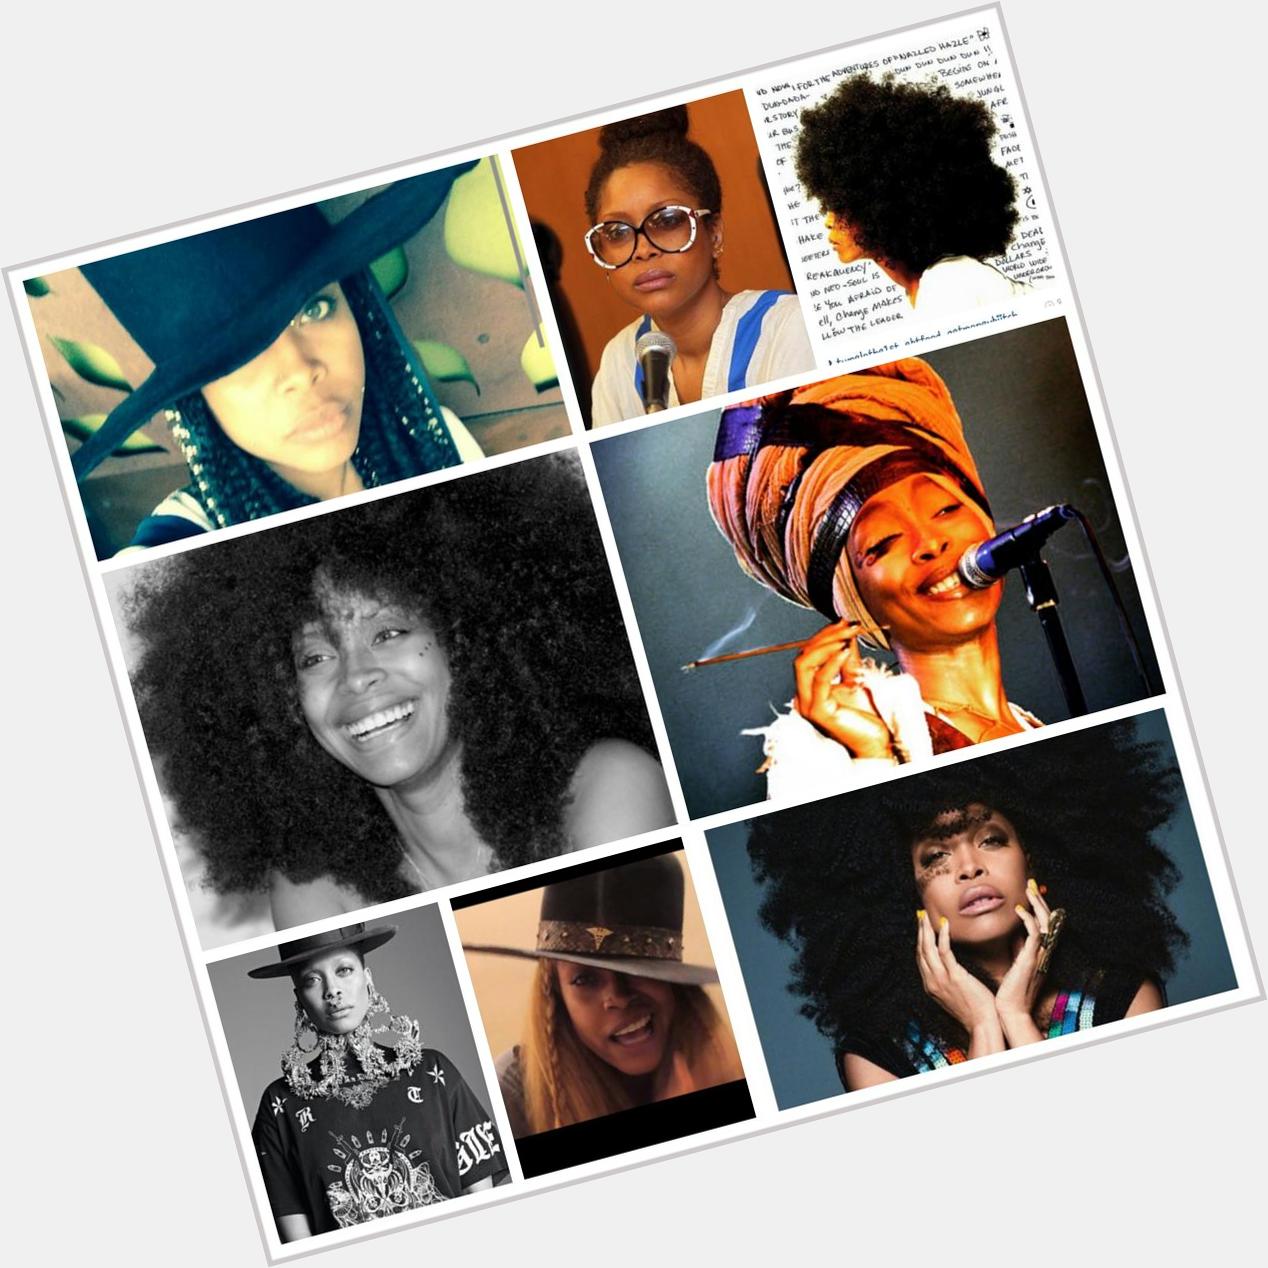 Happy birthday to my idol, my role model, the inner me, the mother I was supposed to have...
Erykah Badu       